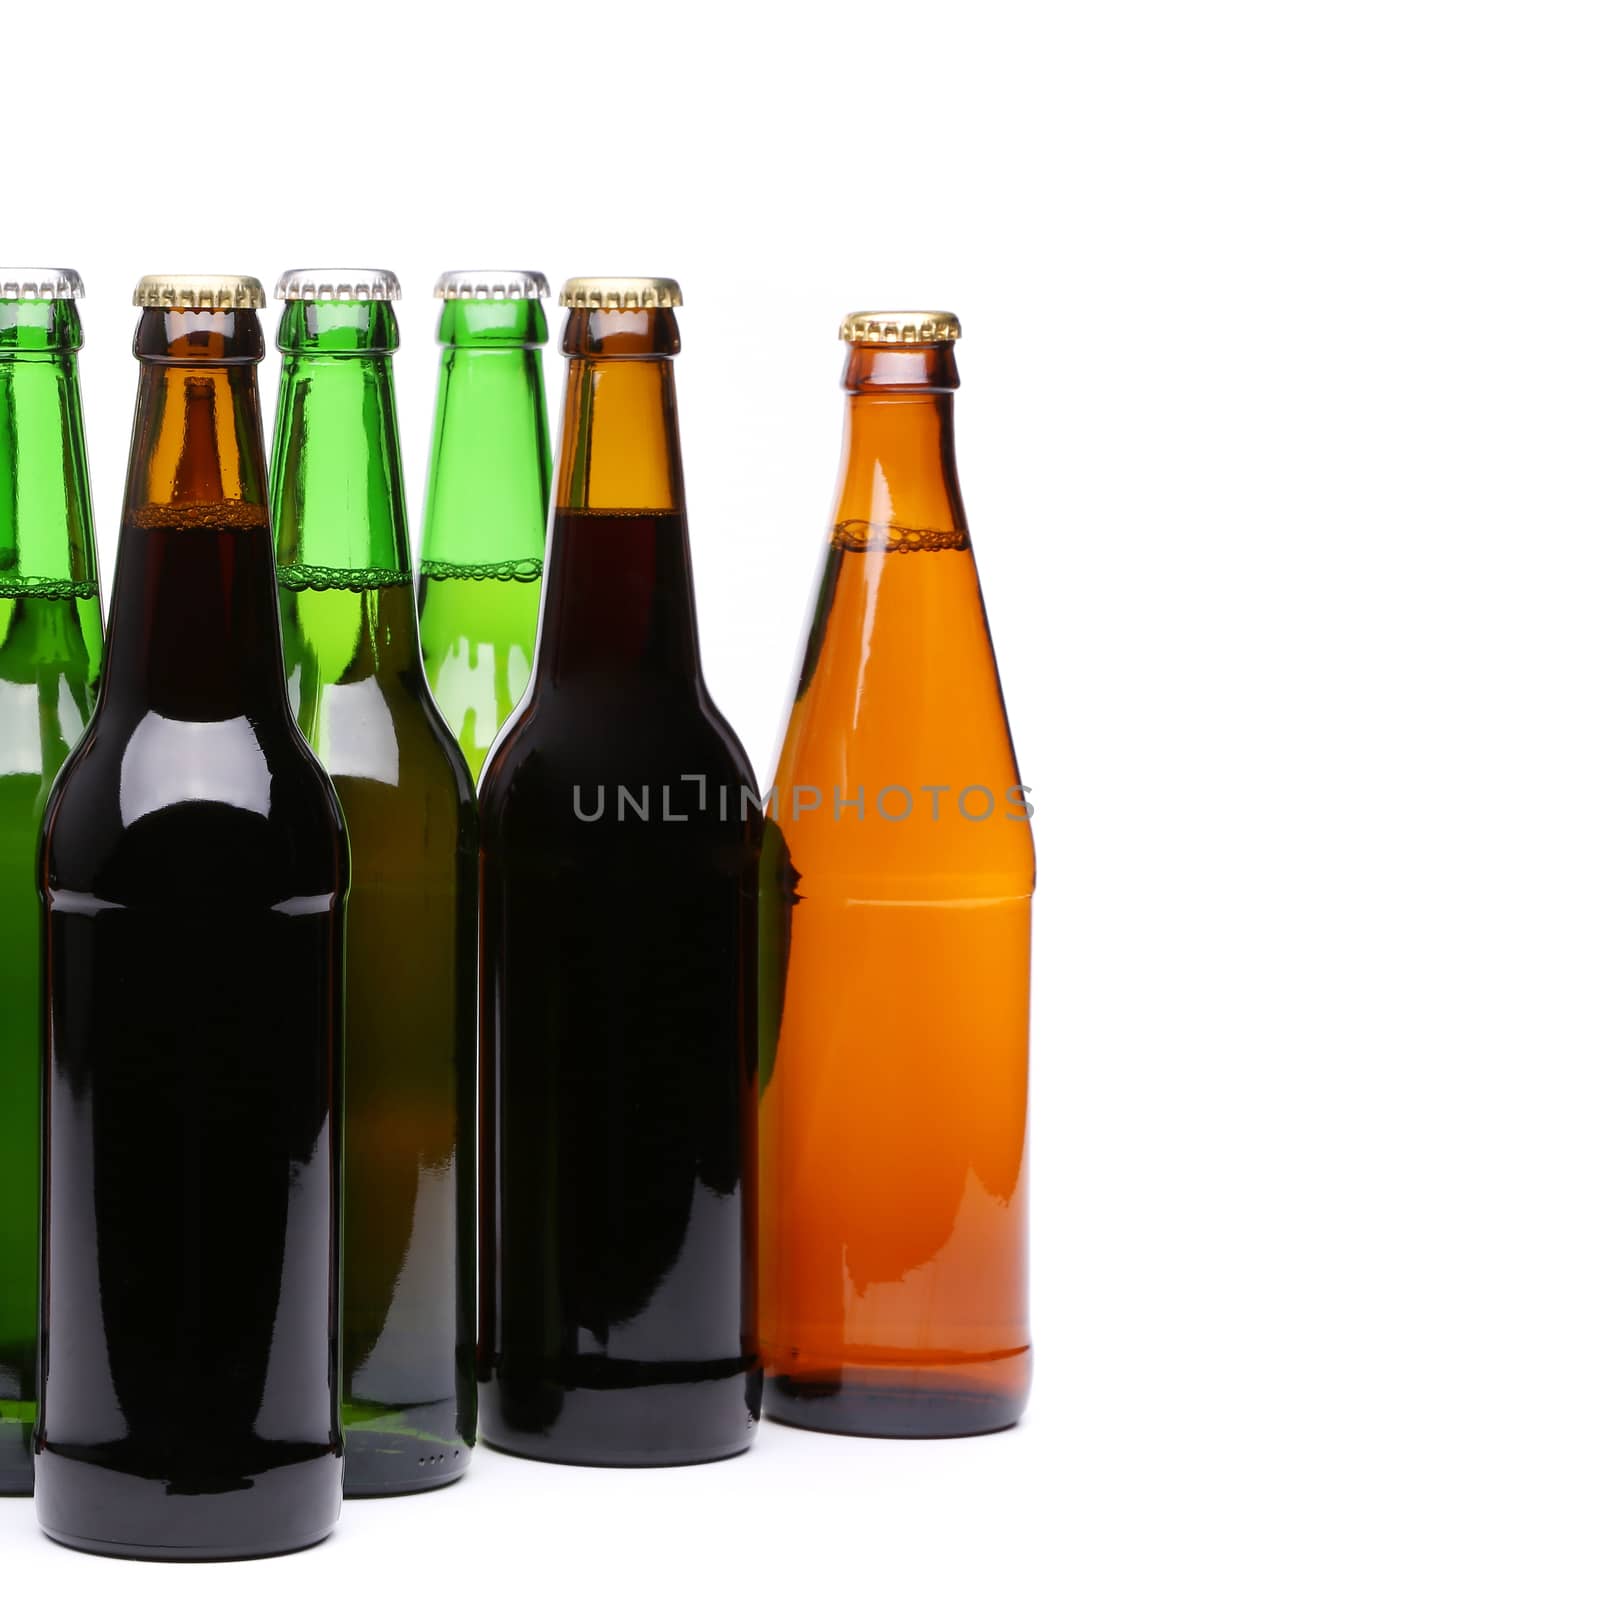 Closed bottles of beer are located left on a white background